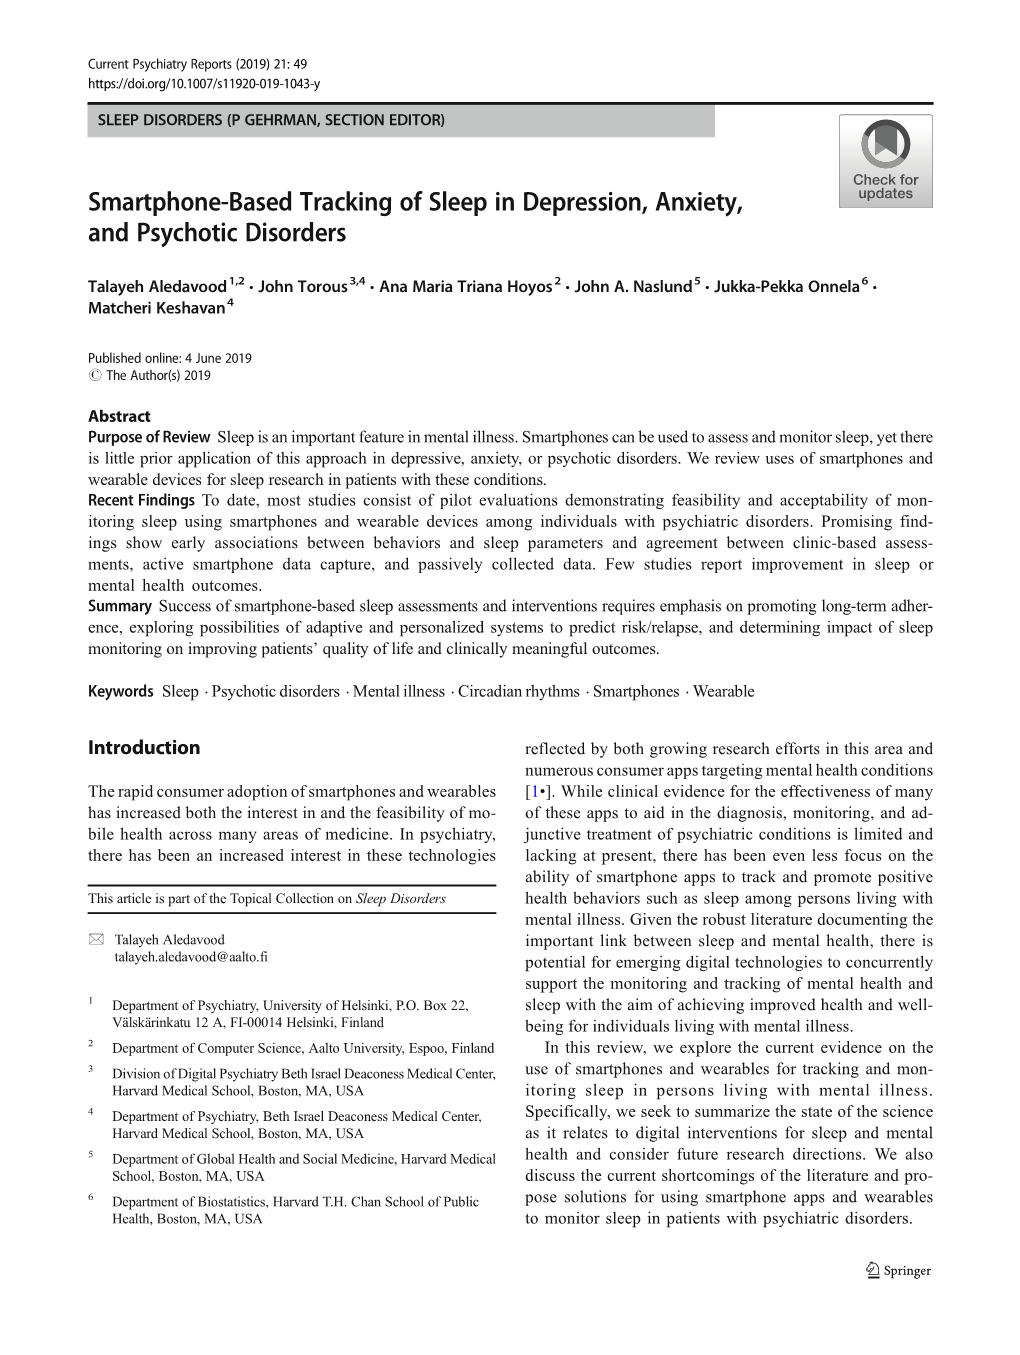 Smartphone-Based Tracking of Sleep in Depression, Anxiety, and Psychotic Disorders